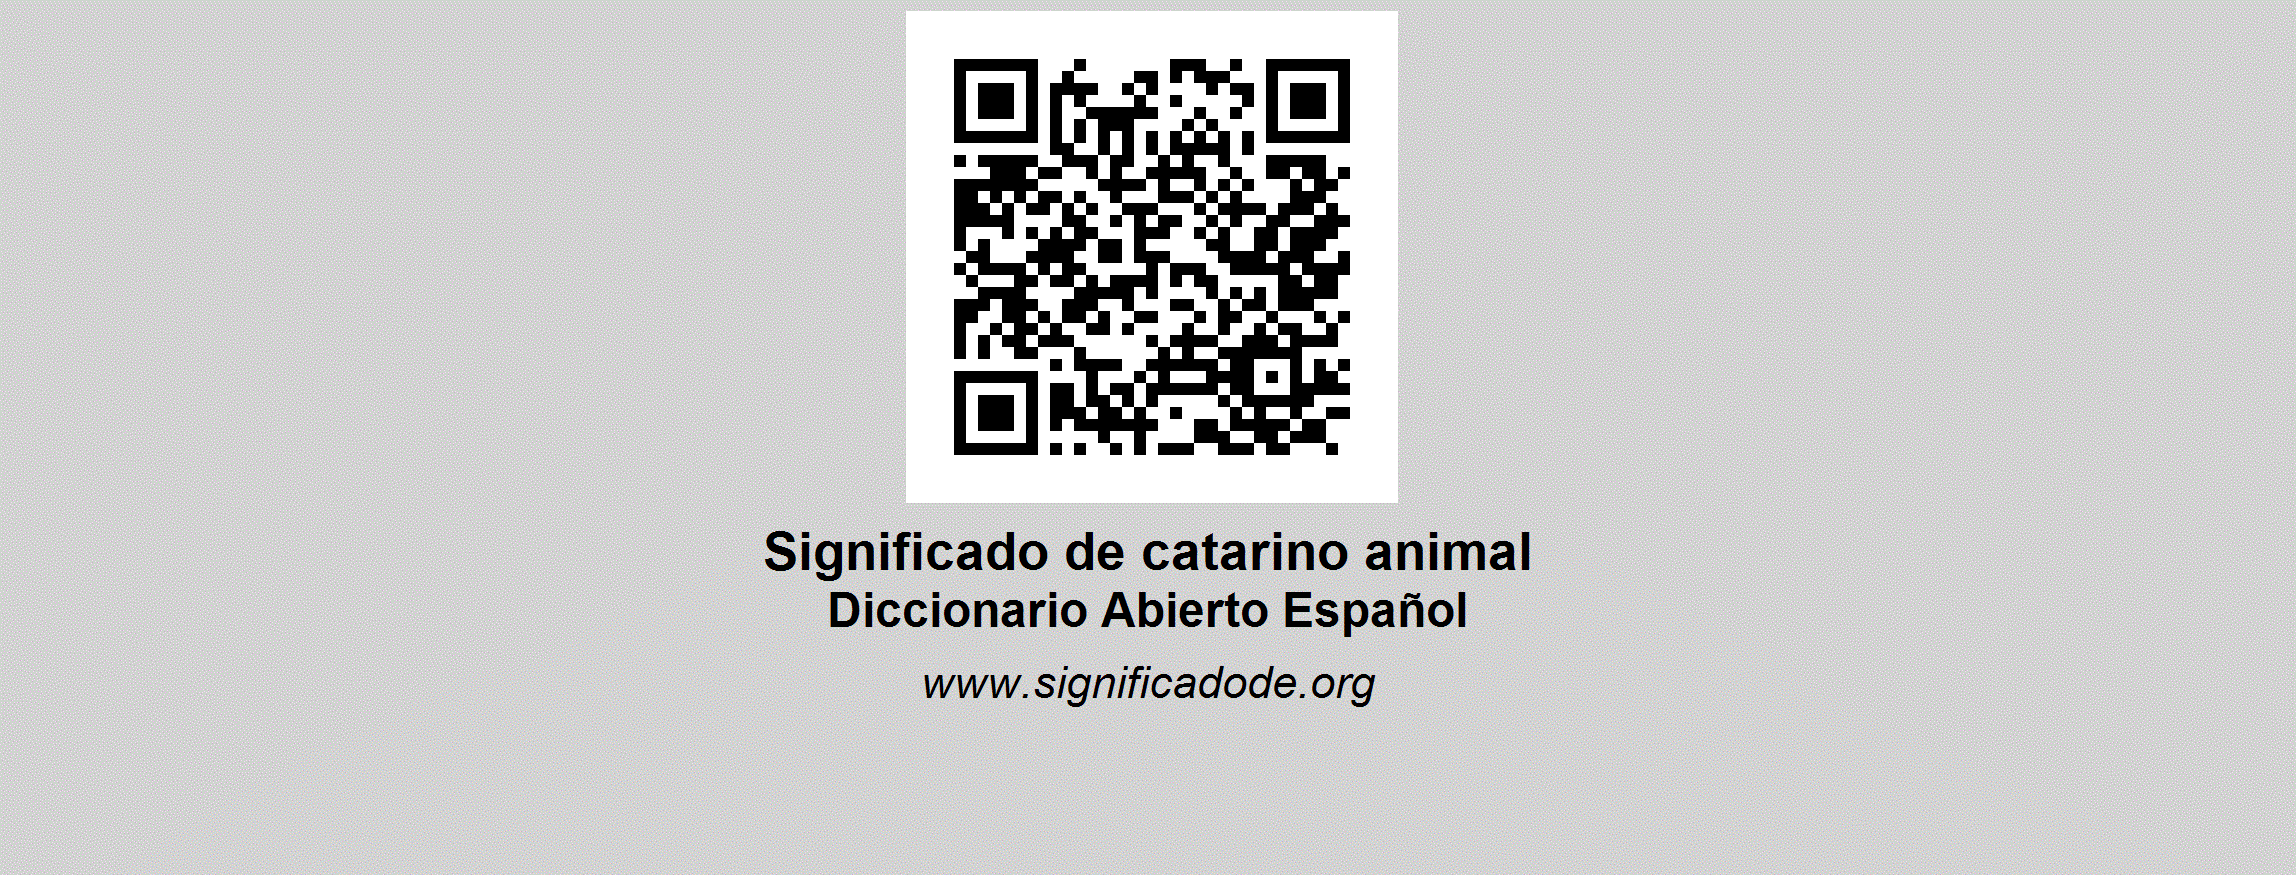 Great Catarino Animal of the decade Learn more here 